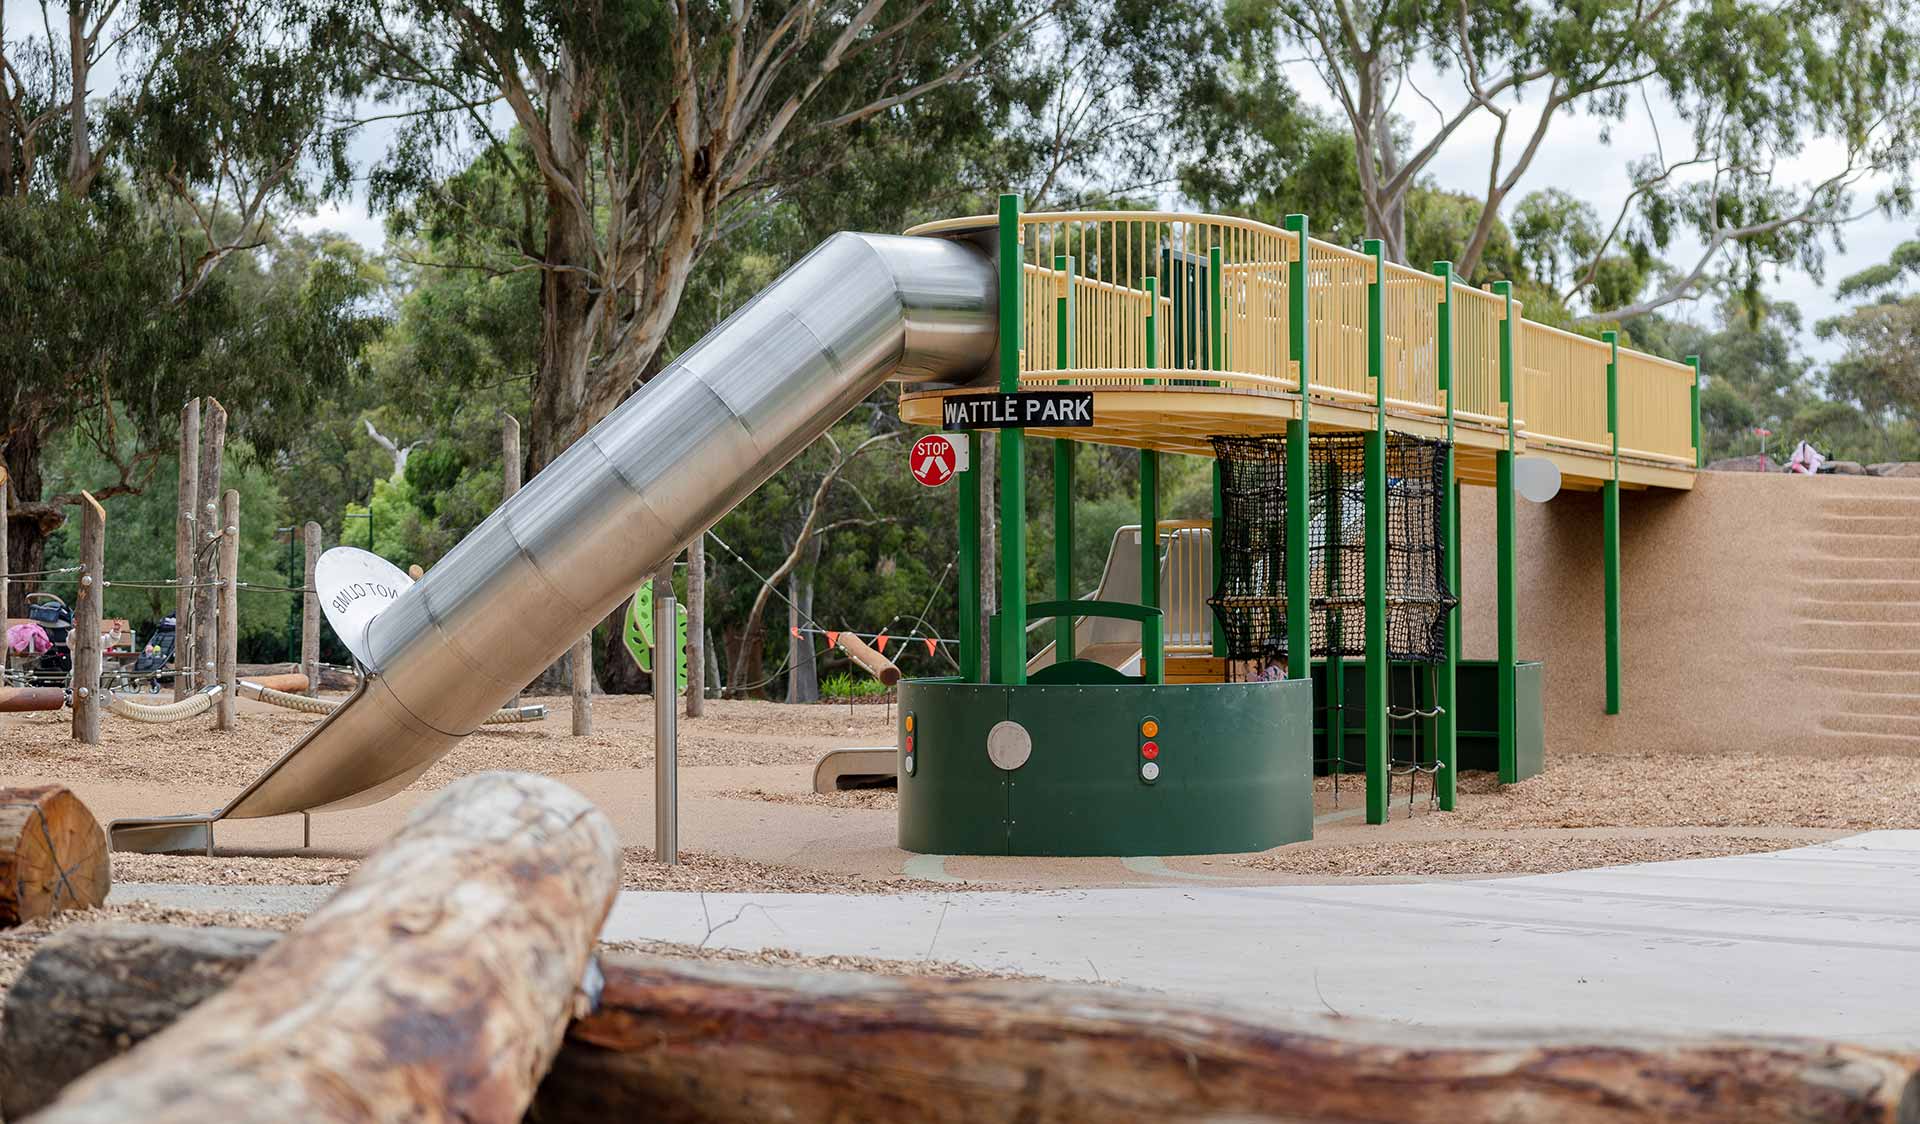 The tram playscape at Wattle Park